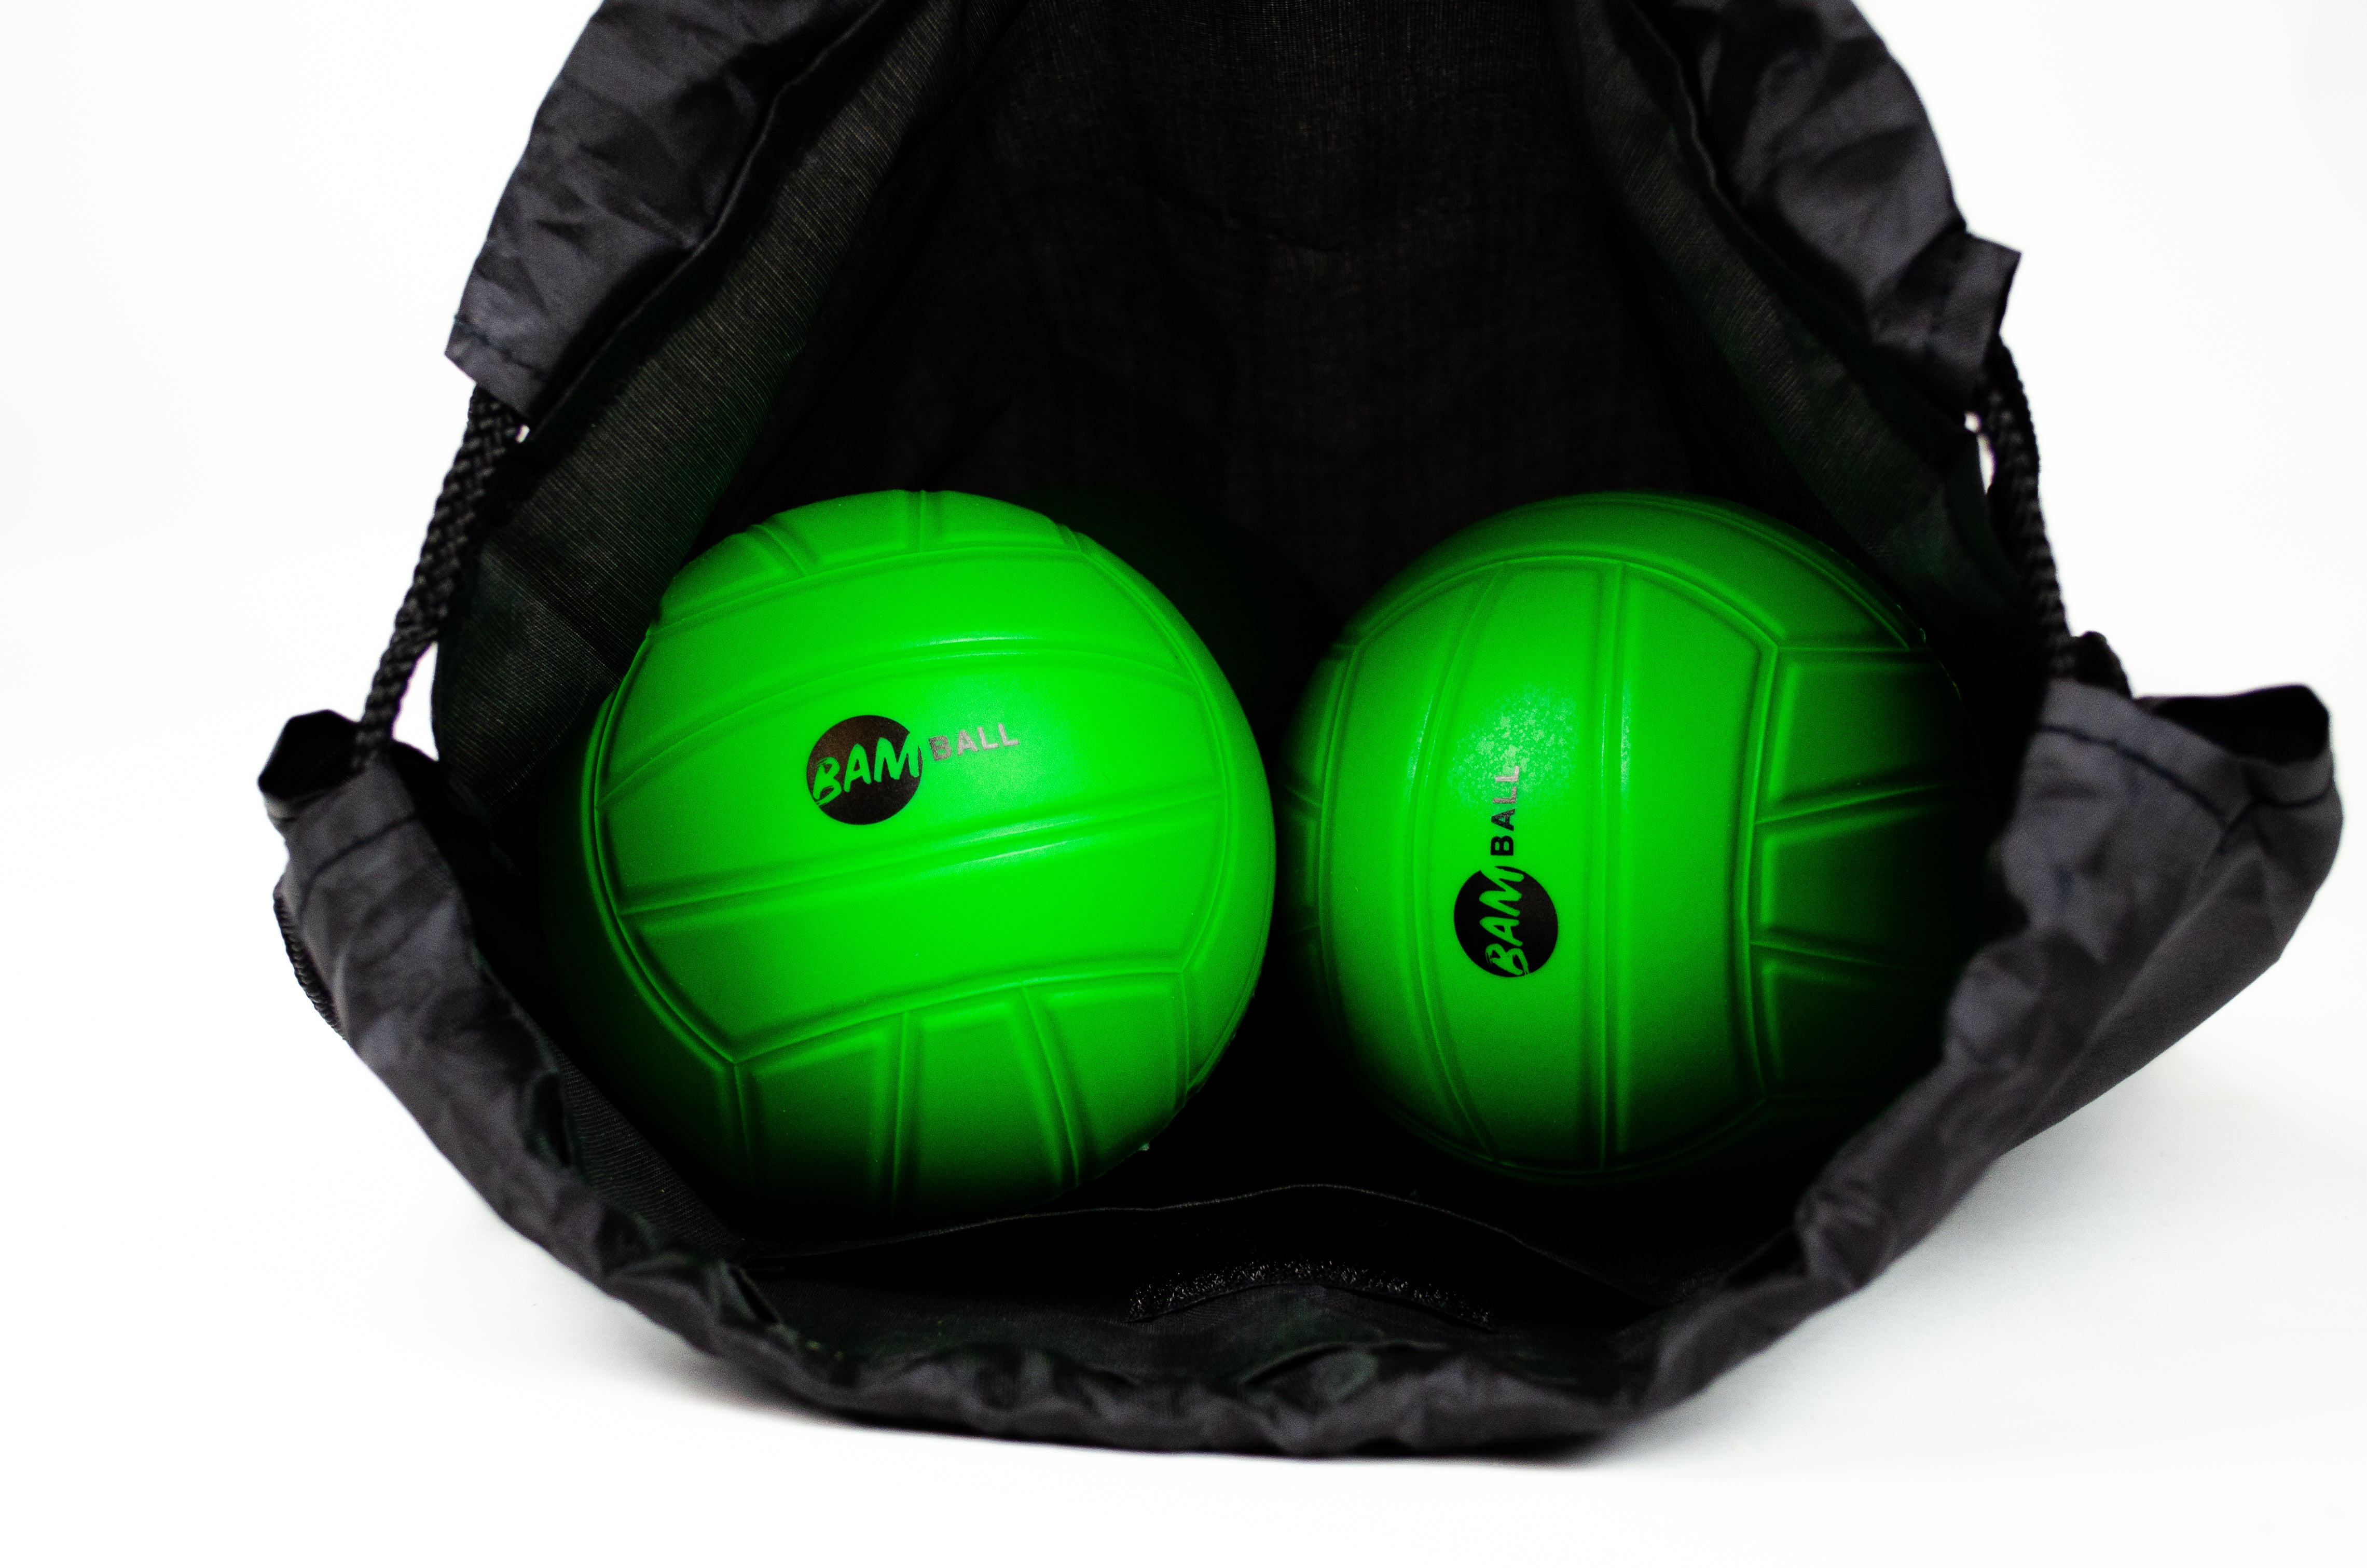 BamBall extra Spielball Pack